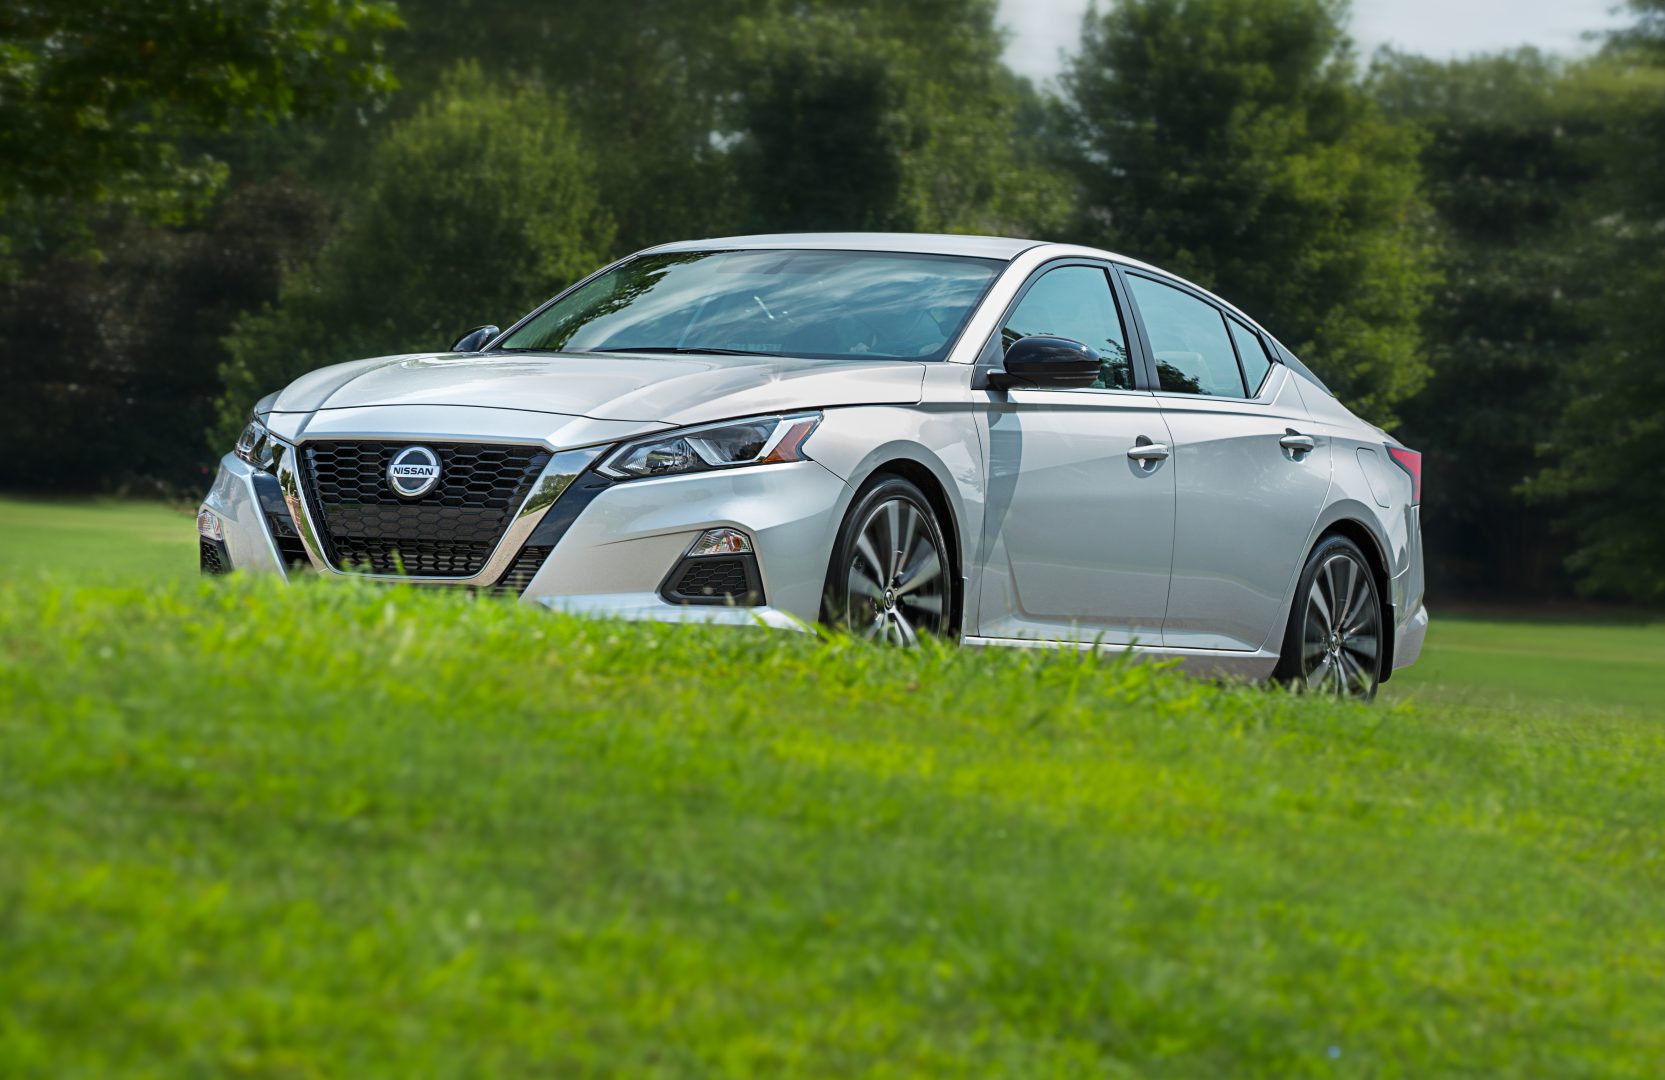 The 2022 Nissan Altima offers consumers style, affordability and innovation